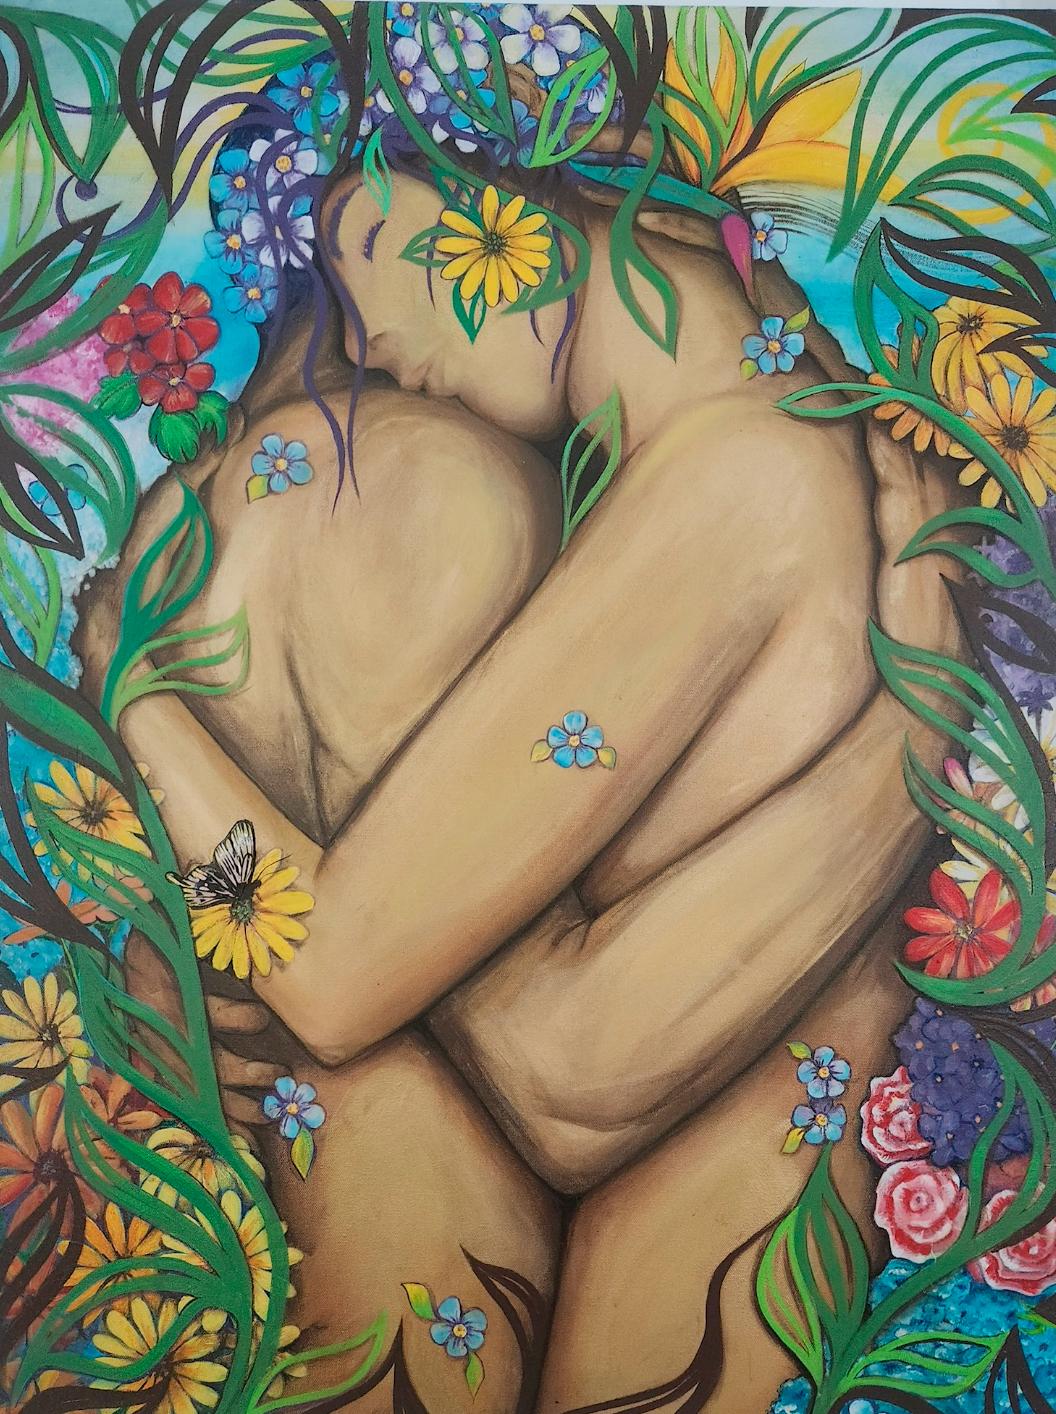 The Hug by Anna Carrieri - Painting by Unknown